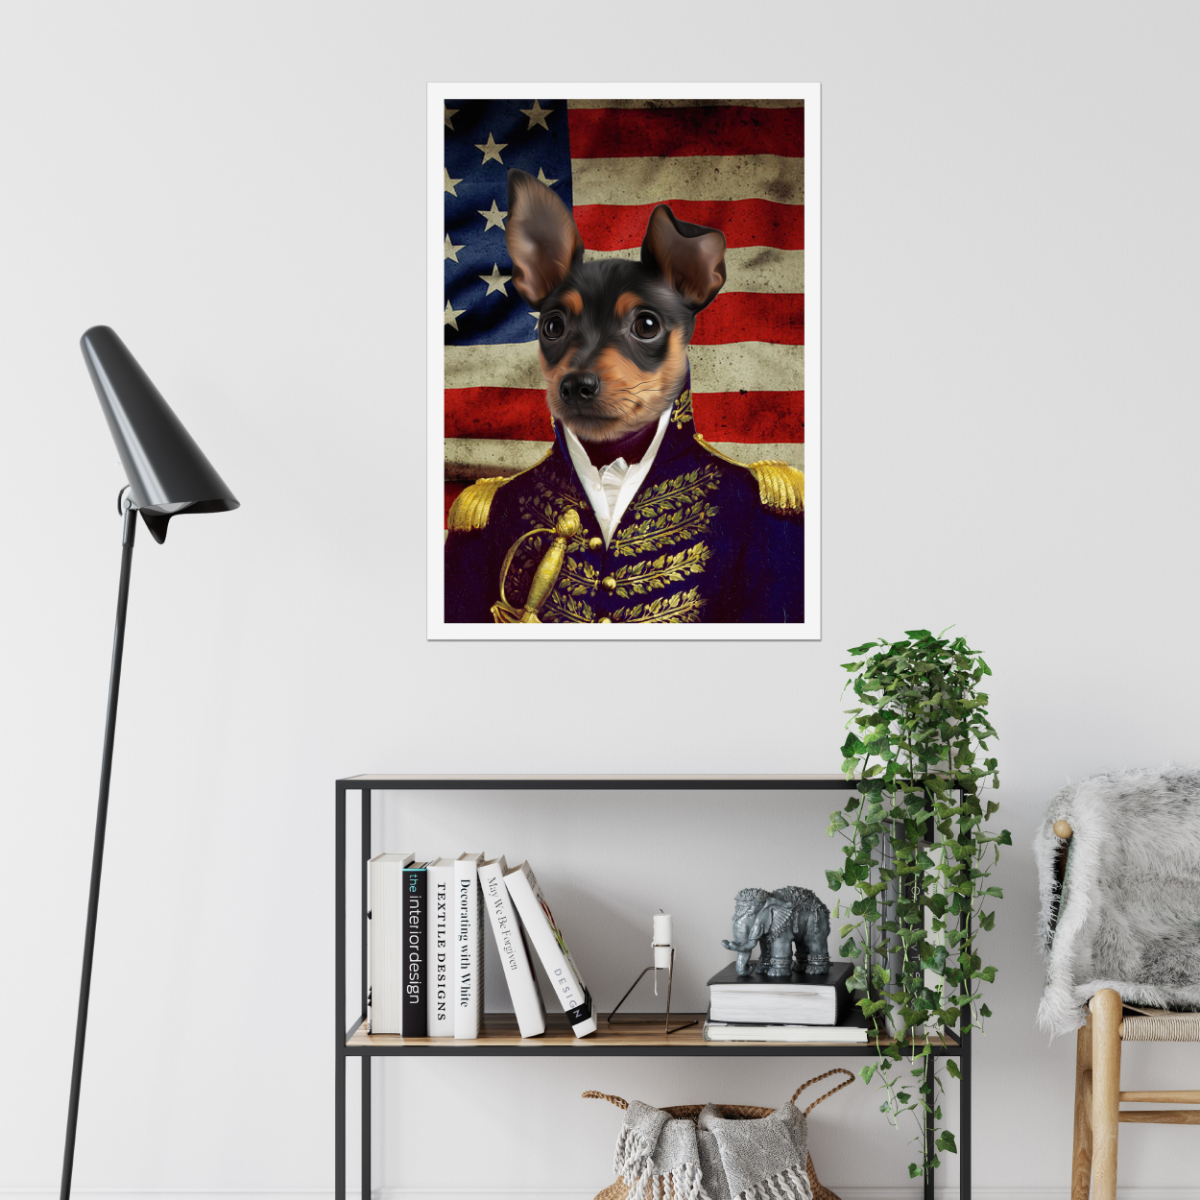 The General - USA Flag Edition: Custom Pet Poster - Paw & Glory - #pet portraits# - #dog portraits# - #pet portraits uk#Paw & Glory, paw and glory, turner and walker sites like crown and paw fancy pet portraits dog family photoshoot pets as paintings paws painting pet portrait